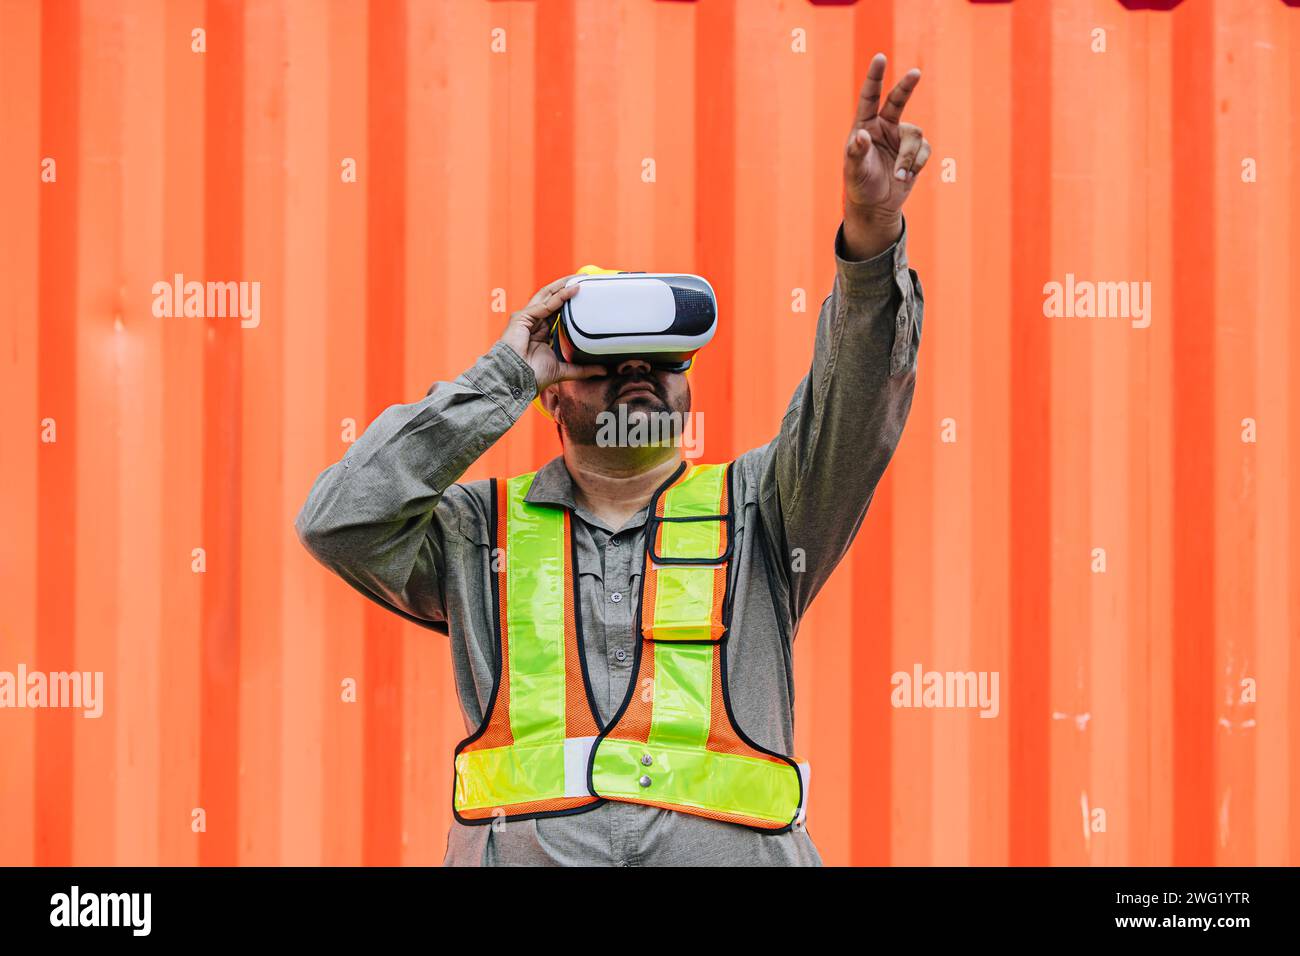 Worker Using VR Vision Pro Technology Equipment Headset Device Work at Container Yard Construction site Innovation in Logistics Industry Stock Photo